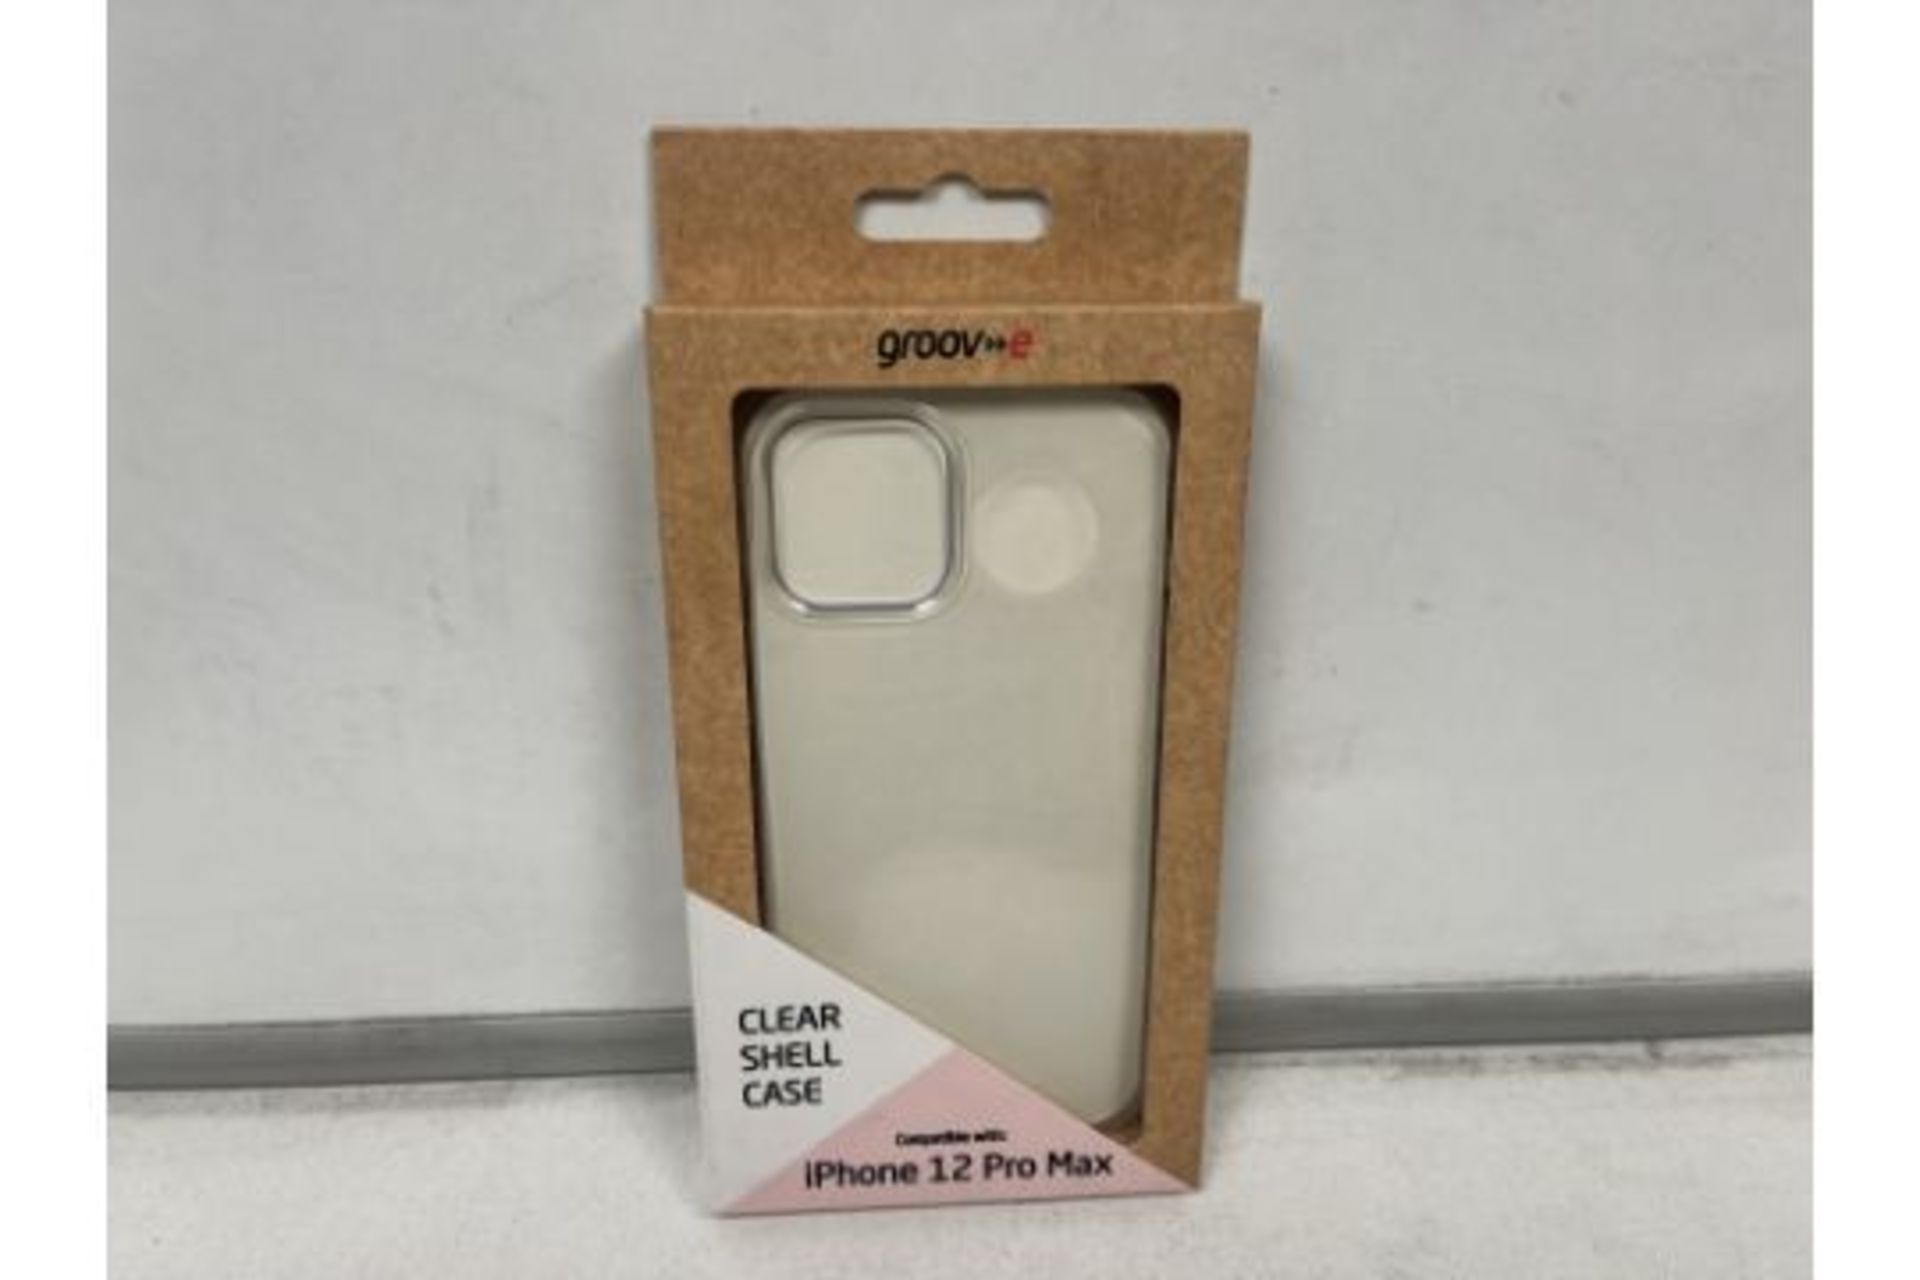 60 X NEW PACKAGED GROOVE IPHONE 12 PRO MAX CLEAR SHELL PHONE CASES. (ROW15RACK)